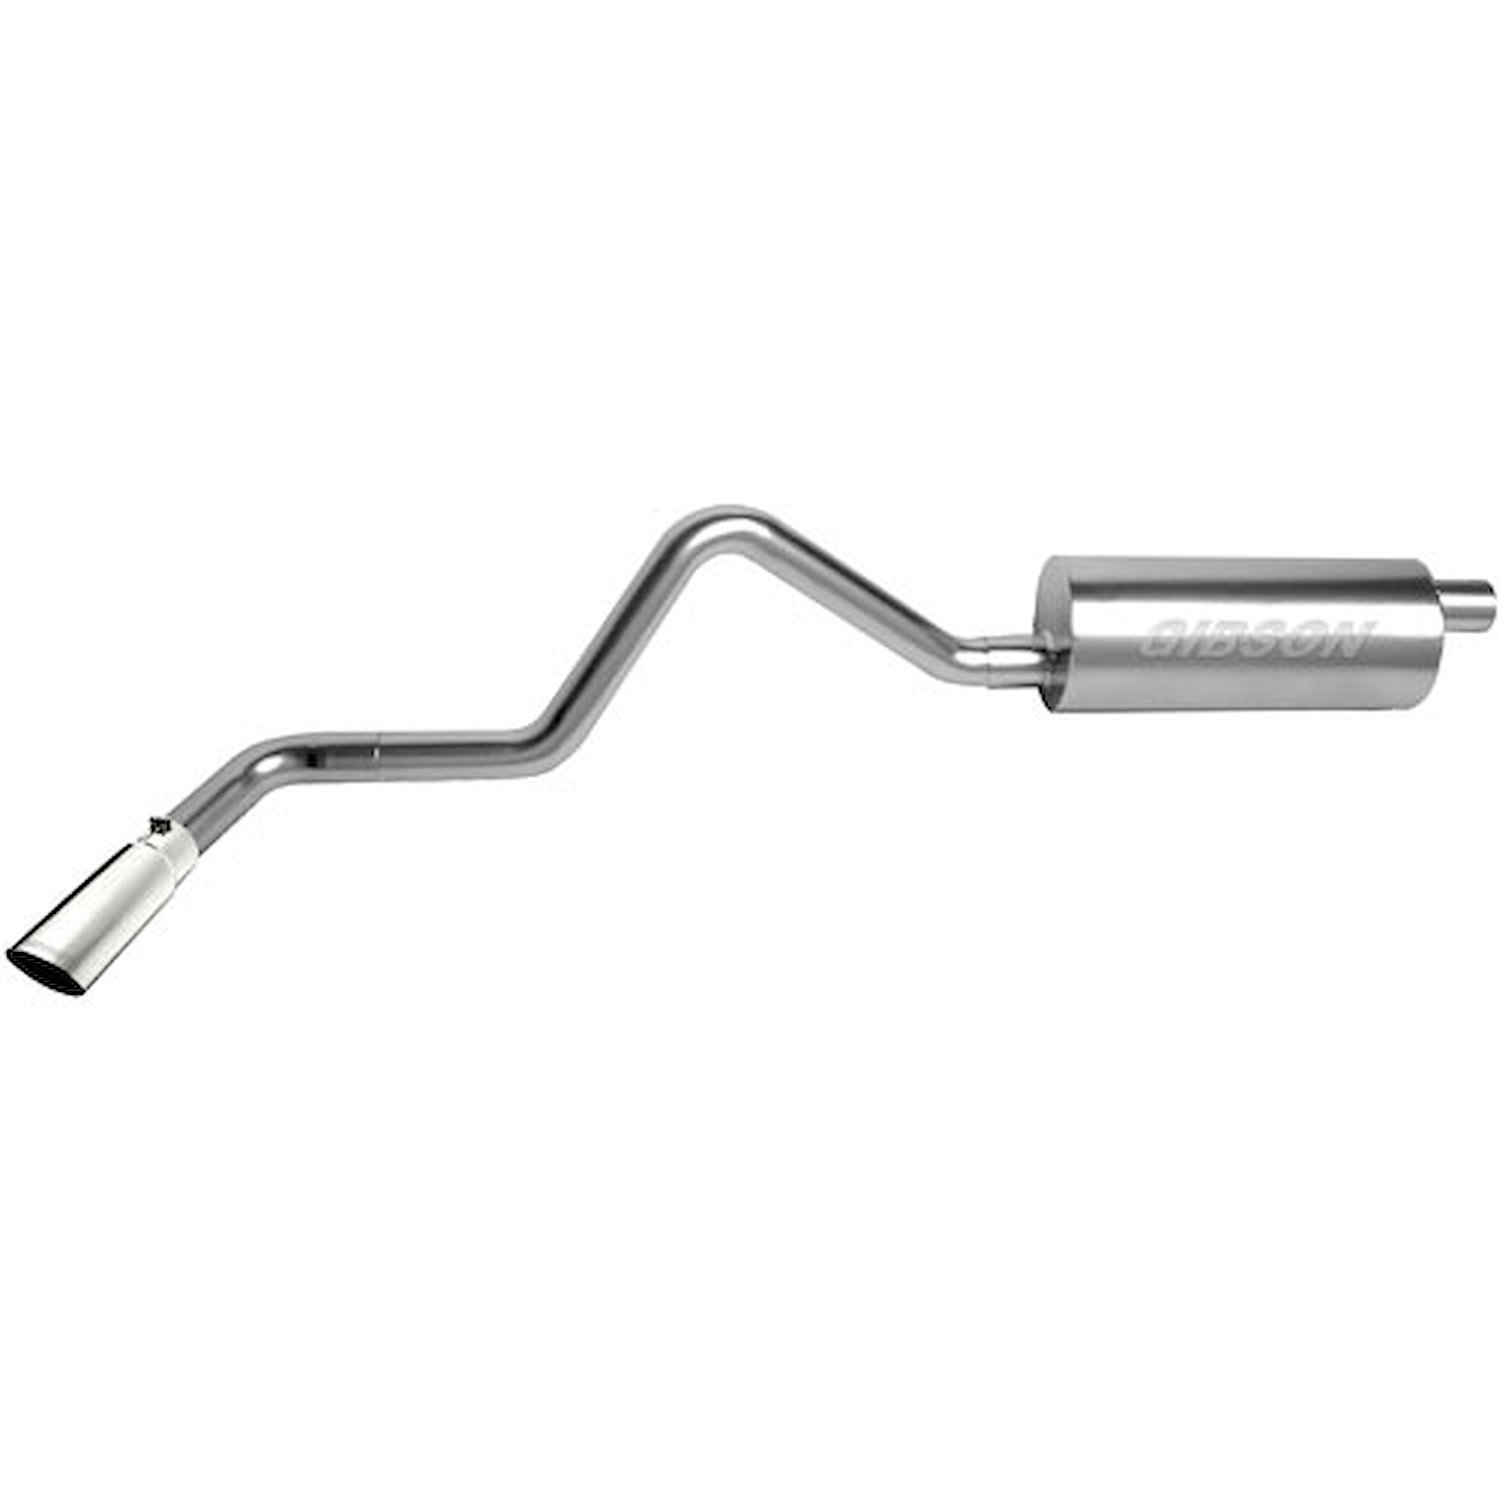 Swept-Side Cat-Back Exhaust 2004-09 Ford F-150 4.6L/5.4L 2WD/4WD